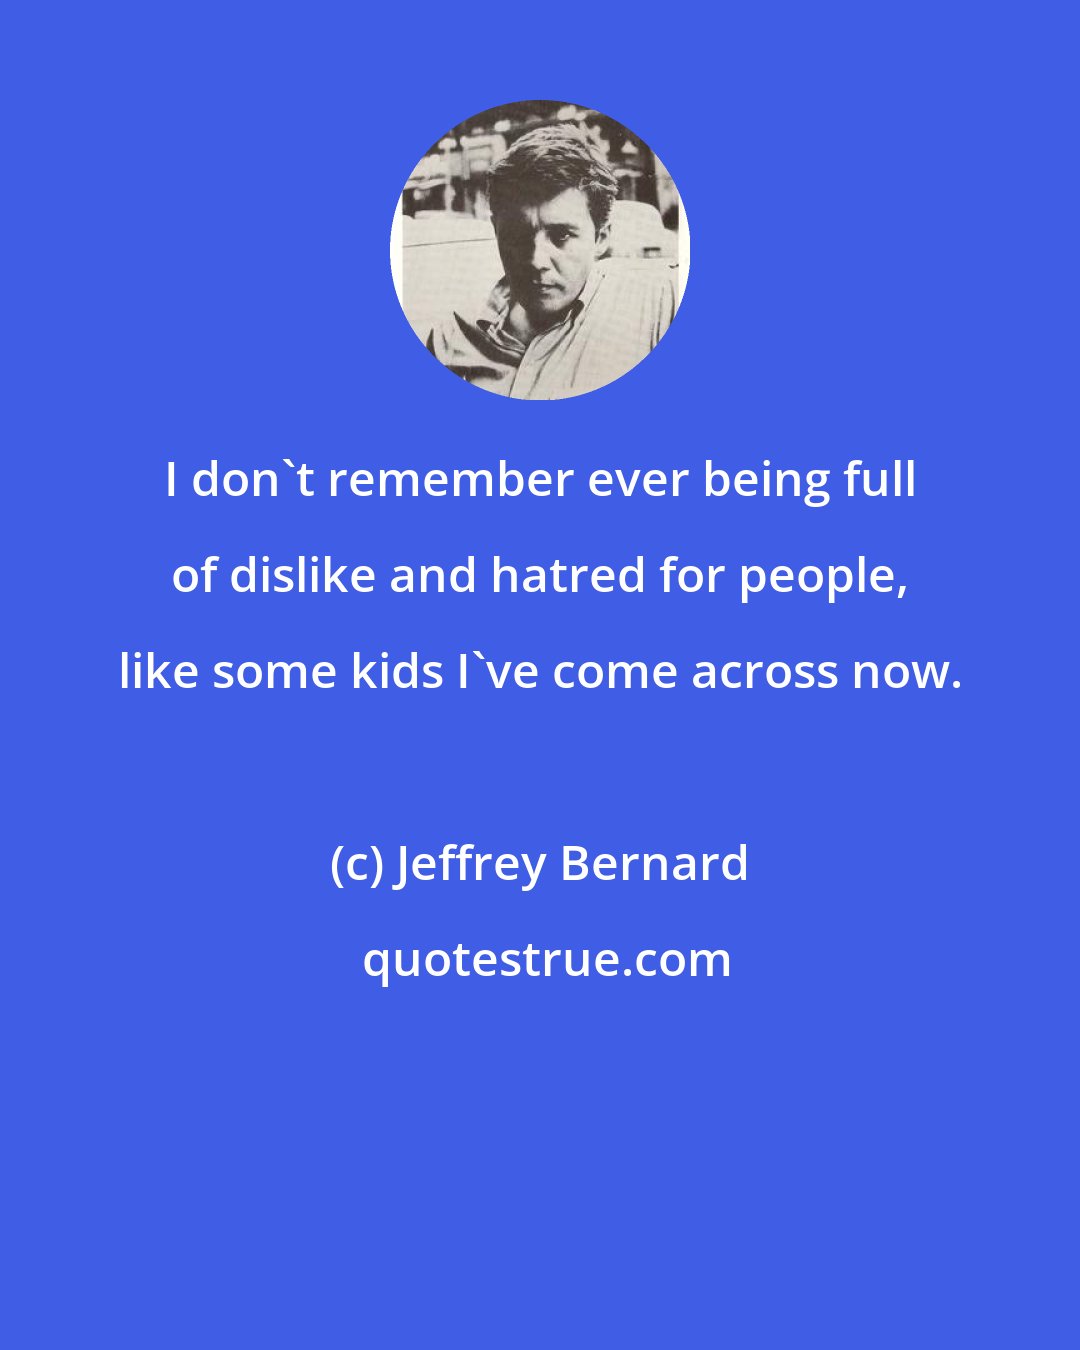 Jeffrey Bernard: I don't remember ever being full of dislike and hatred for people, like some kids I've come across now.